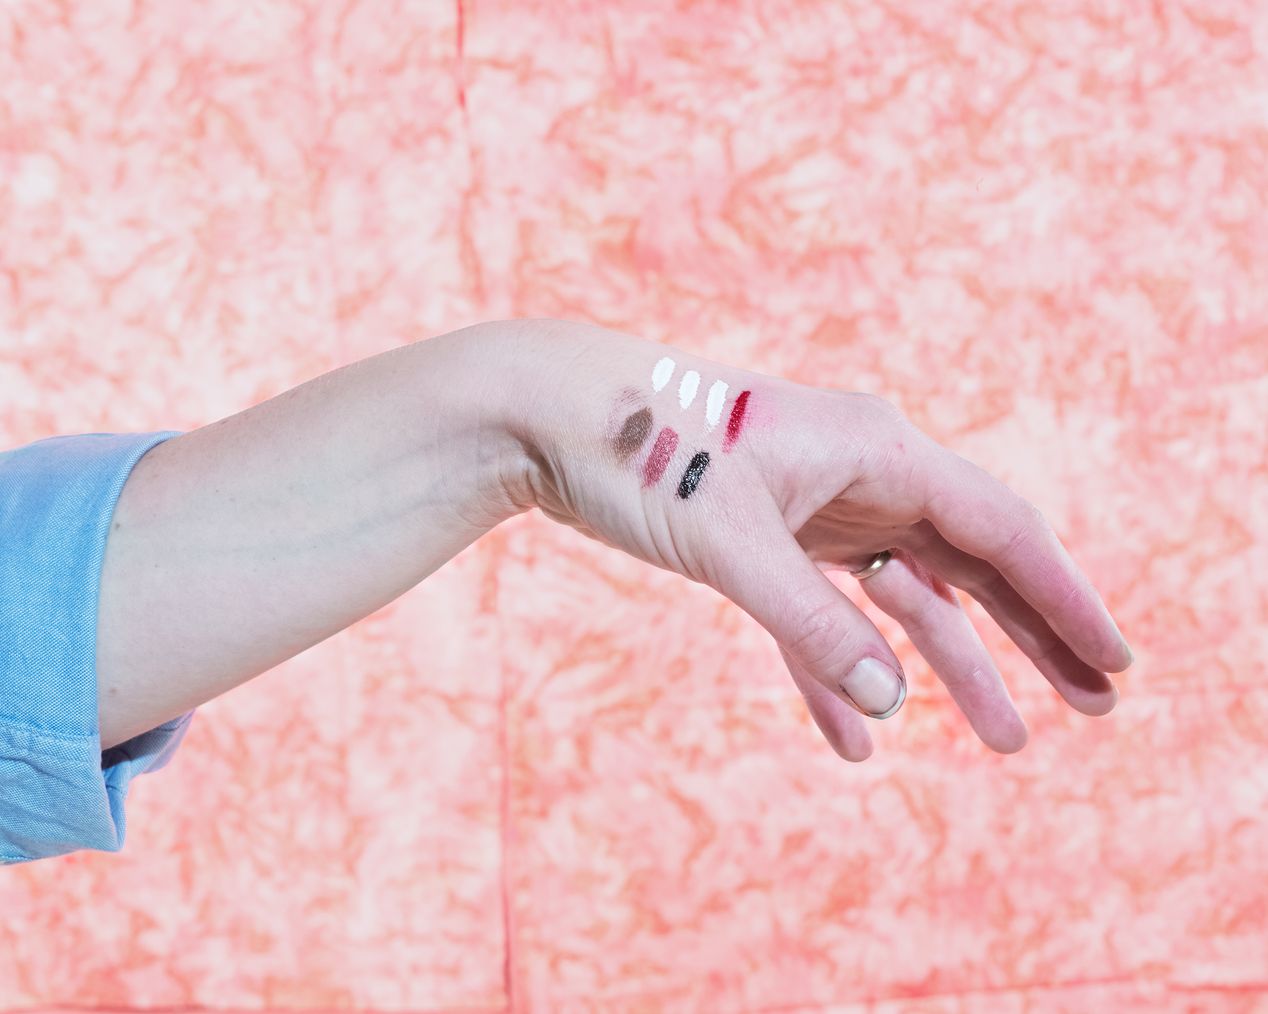 A hand with colorful marks on it, art photography, Ilona Szwarc, contemporary Los Angeles artist.